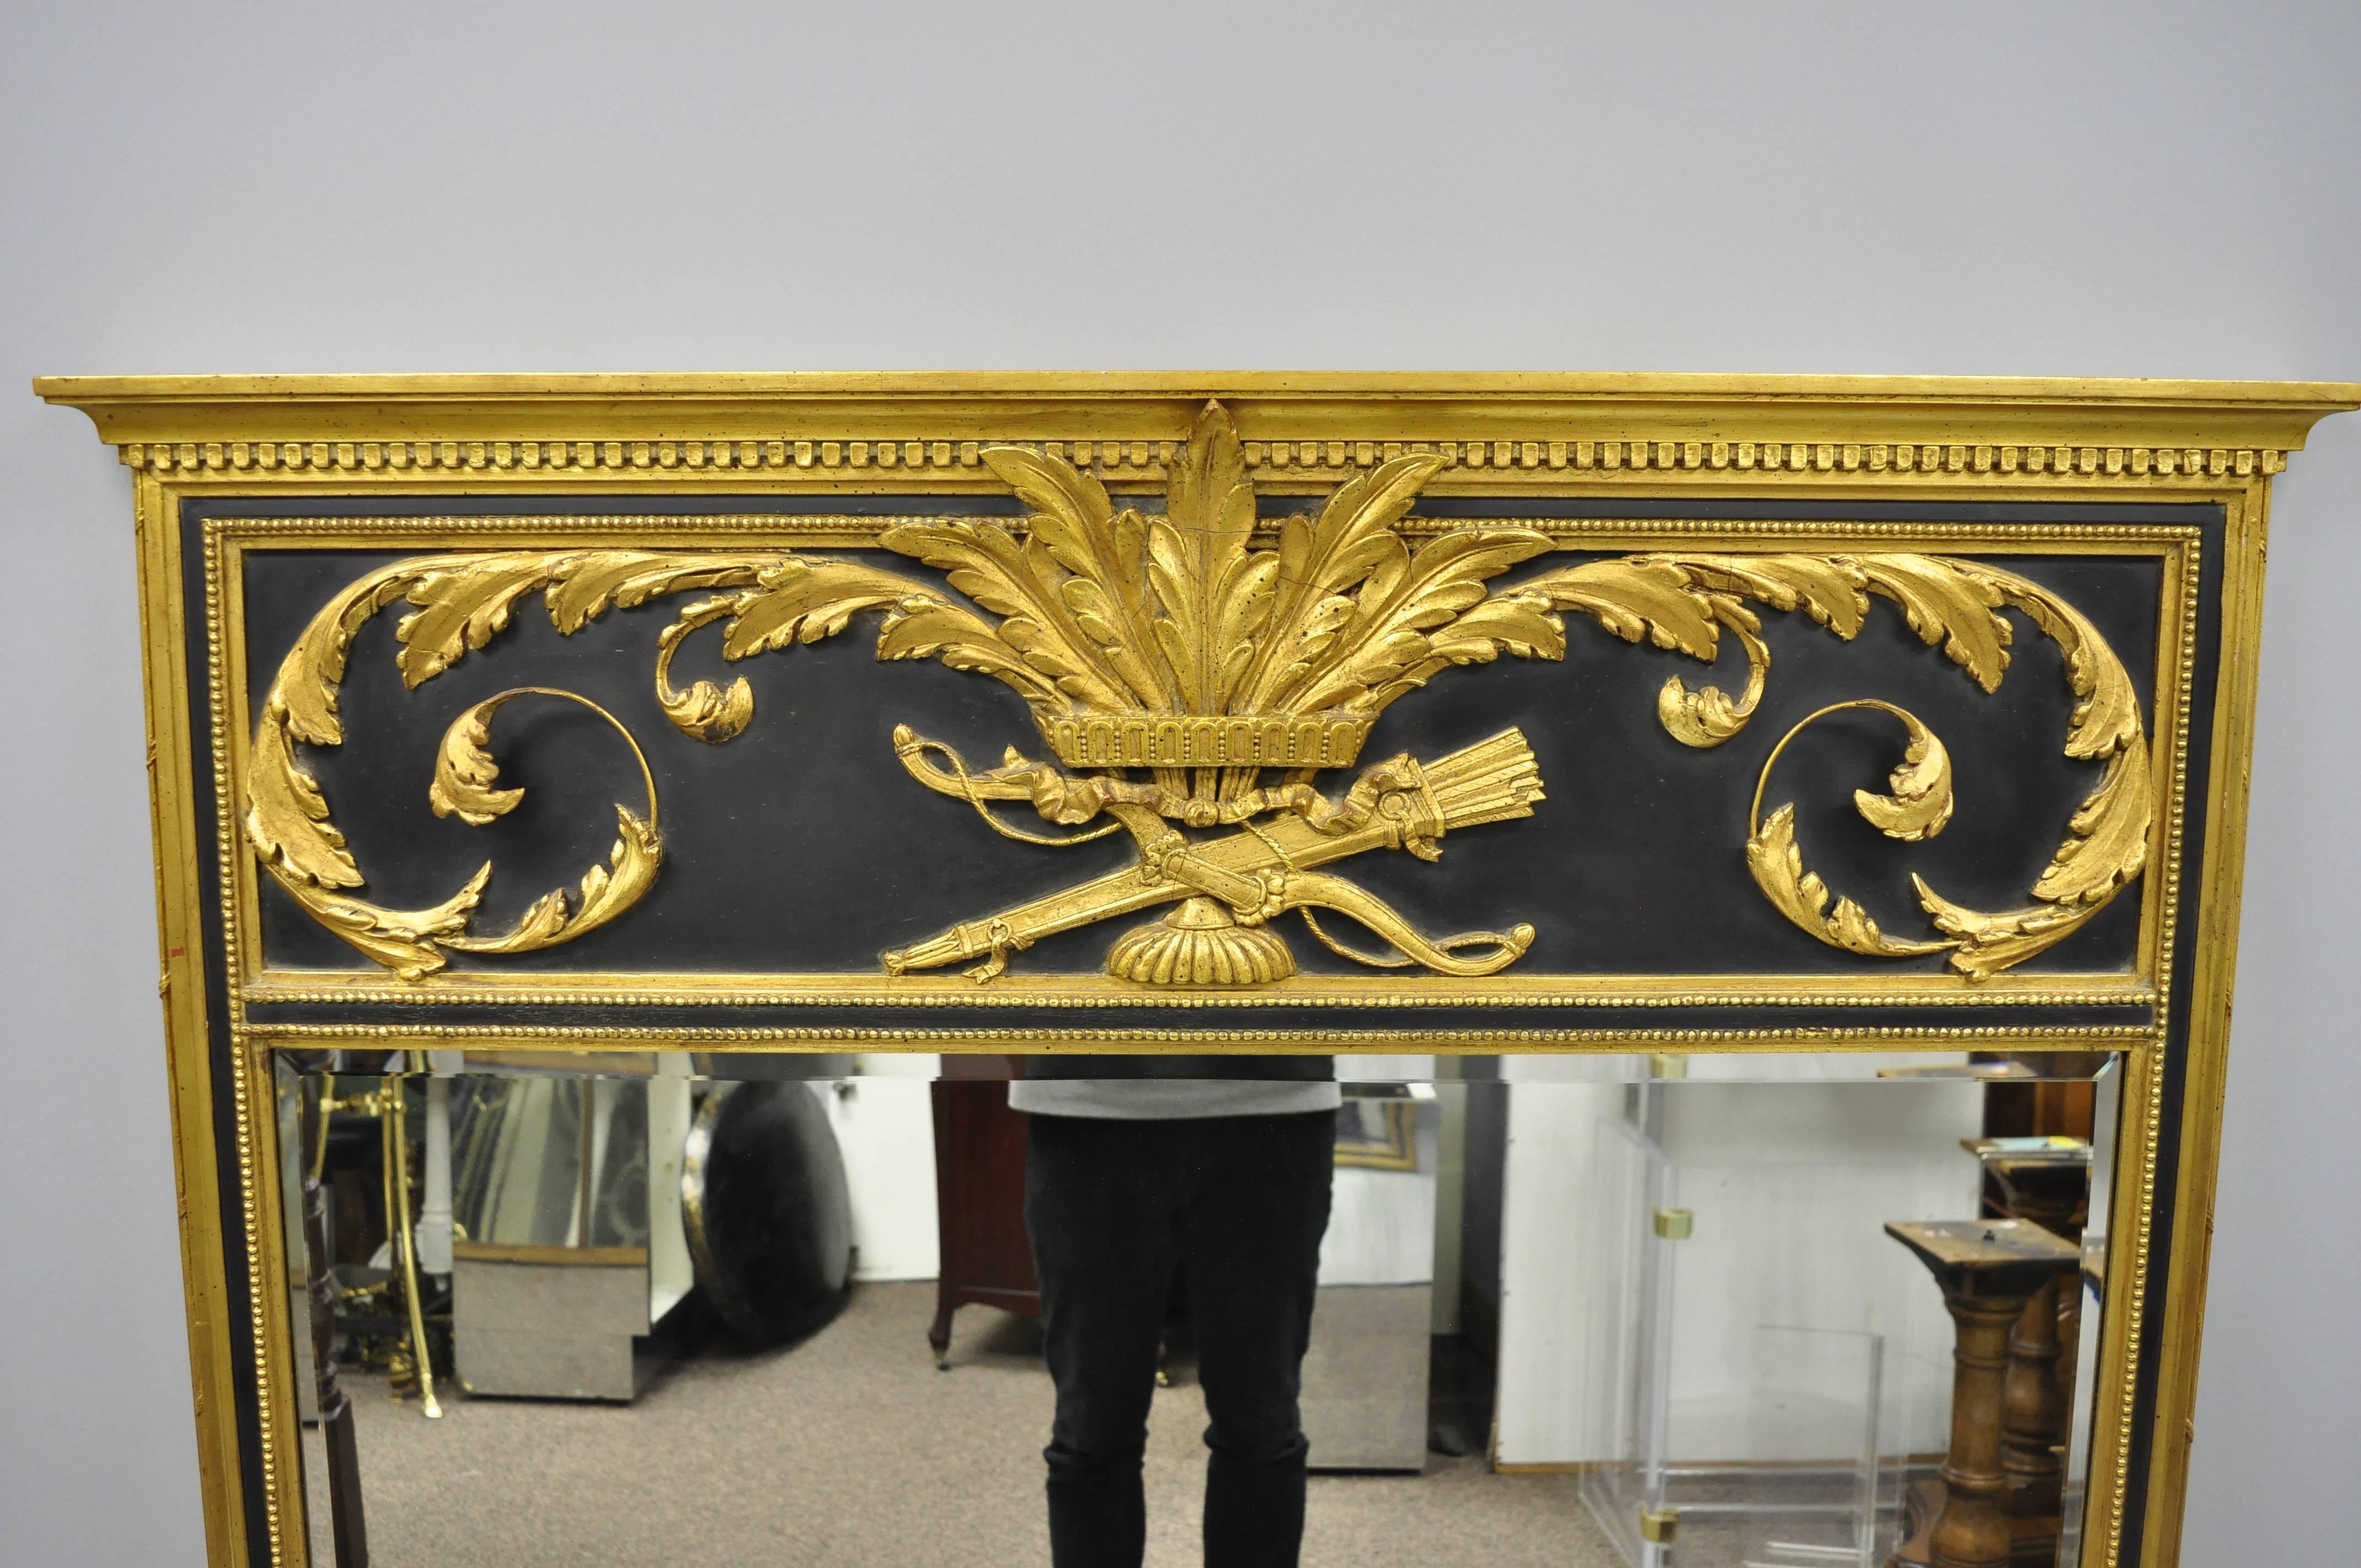 French Louis XV neoclassical style large black and gold giltwood trumeau wall mirror. Item features gold giltwood frame, bow and arrow designed crest with acanthus leaf scrollwork and black accents, beveled glass mirror, great style and form,